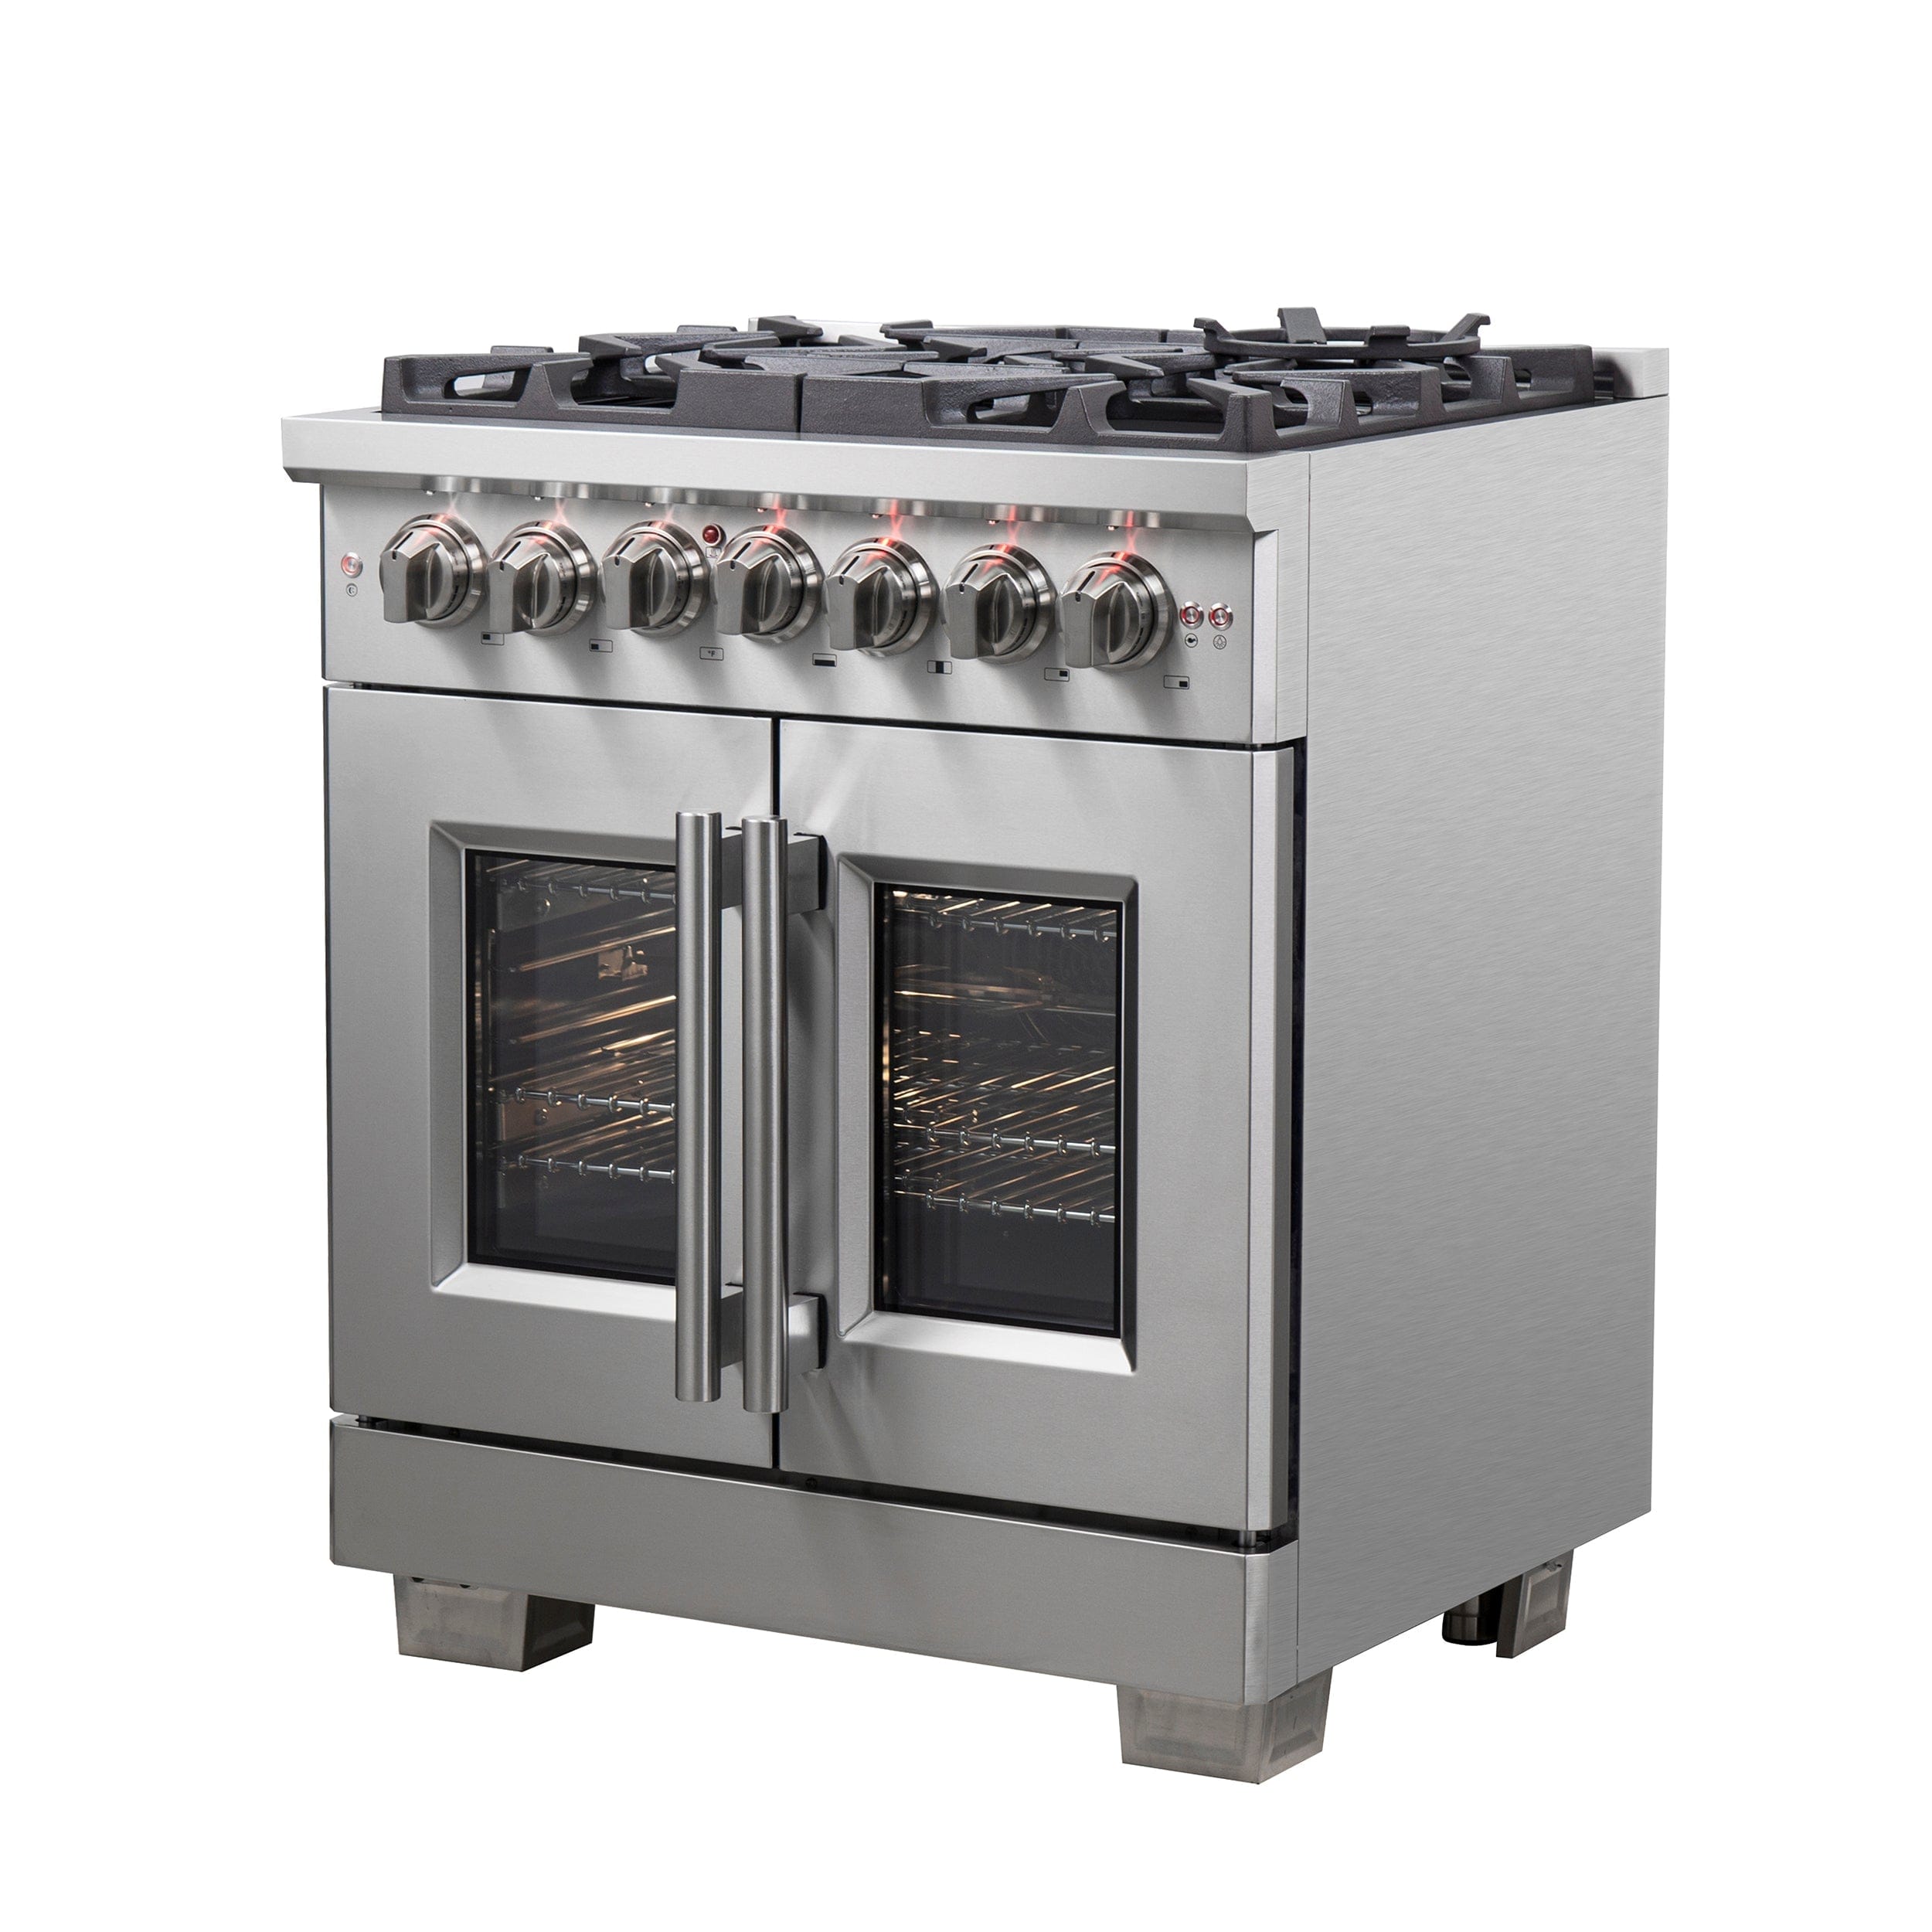 Forno Capriasca 30" Professional Gas Burner, Electric Oven Range With French Door And 5 Sealed Burners, FFSGS6387-30 Ranges FFSGS6387-30 Luxury Appliances Direct